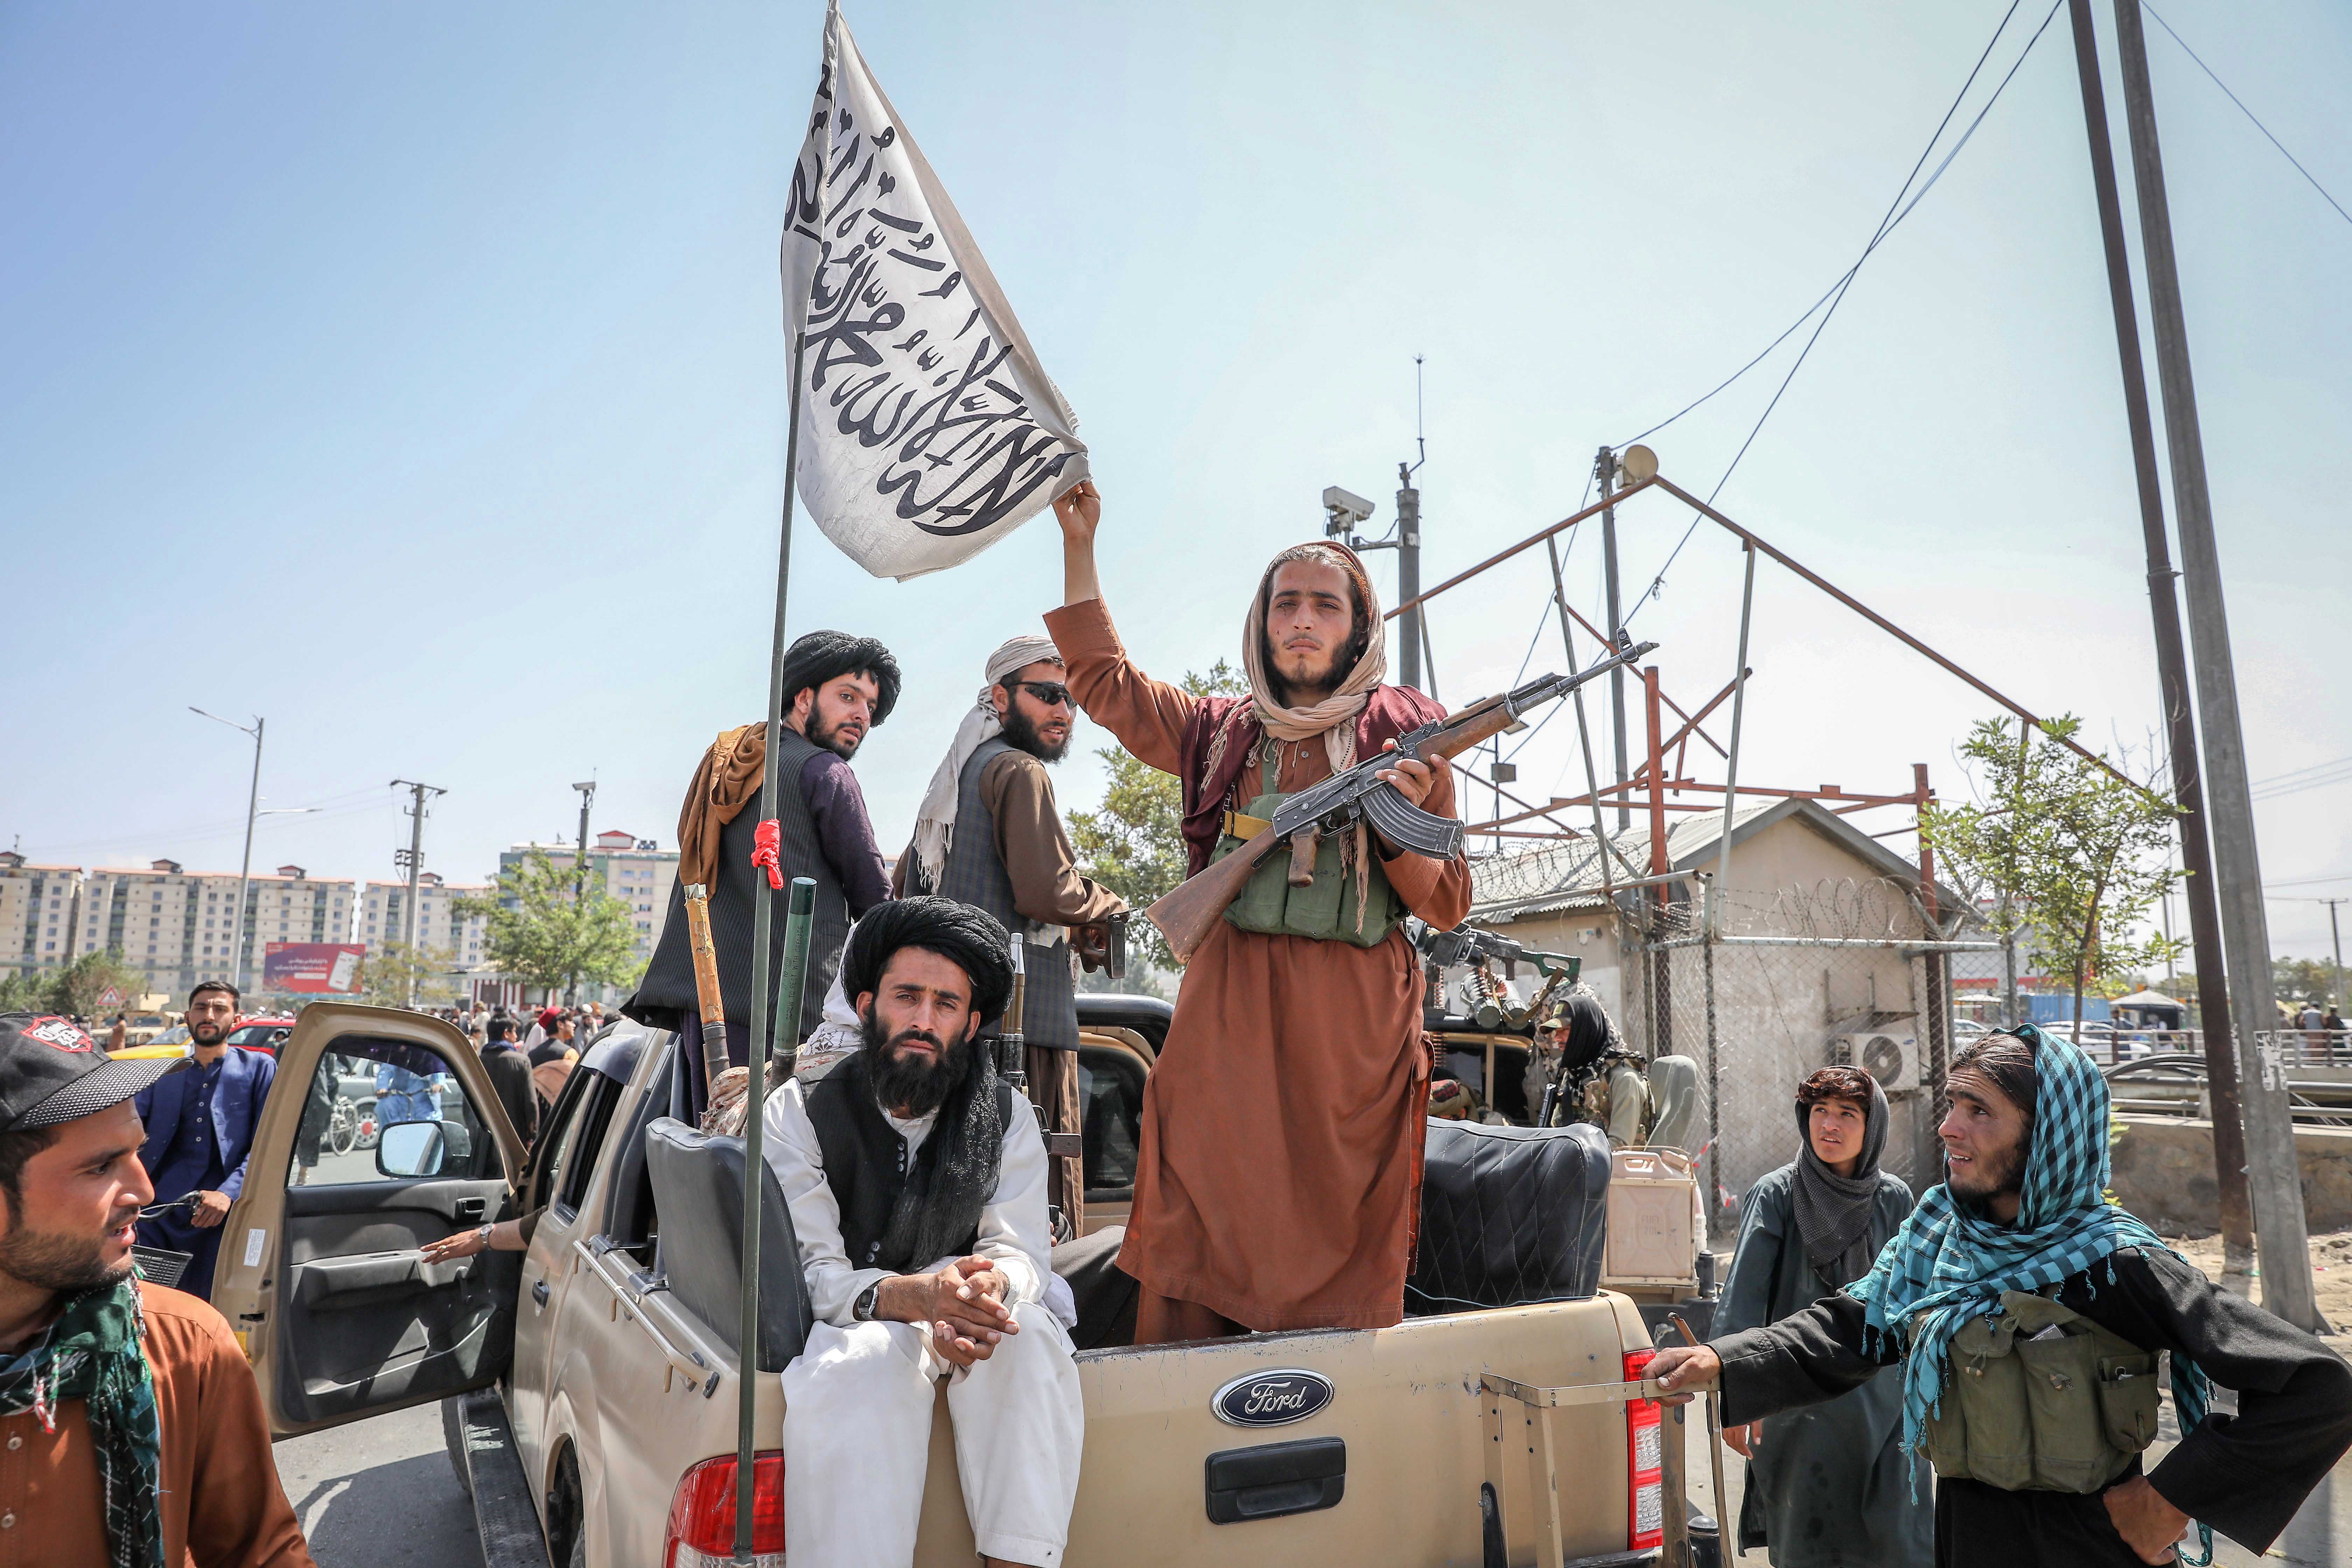 Taliban fighters are seen on the back of a vehicle in Kabul, Afghanistan